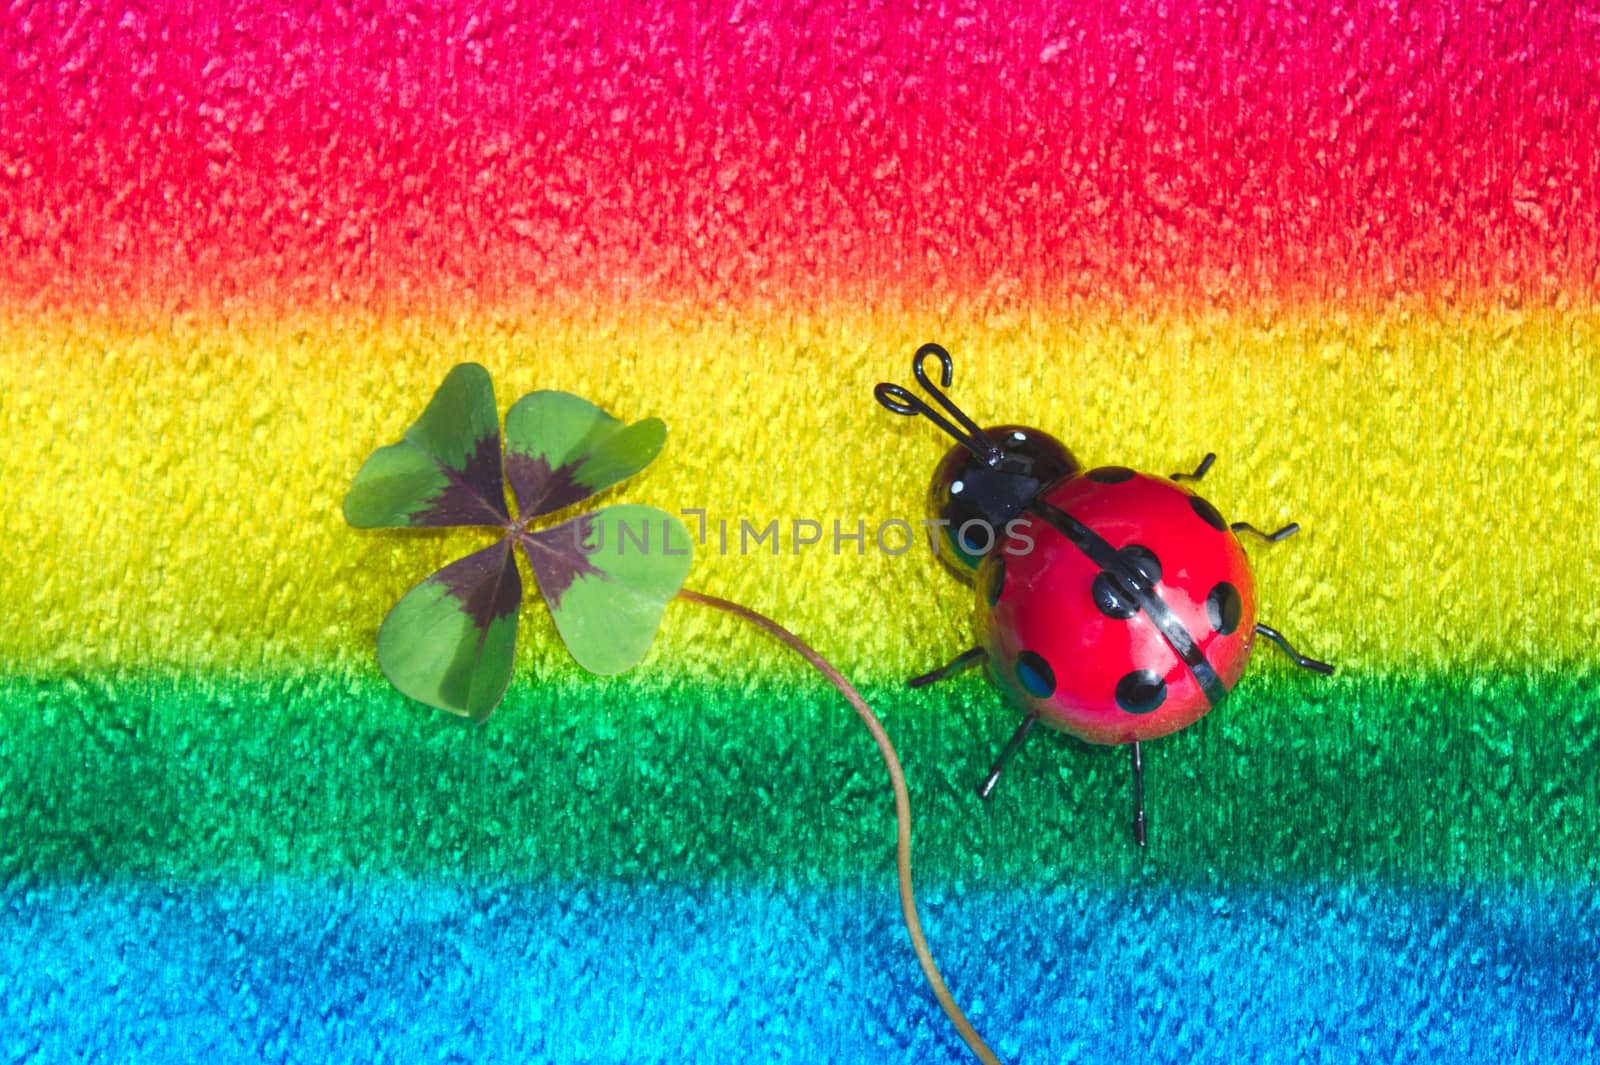 The picture shows a ladybird and lucky clover on colorful crepe paper